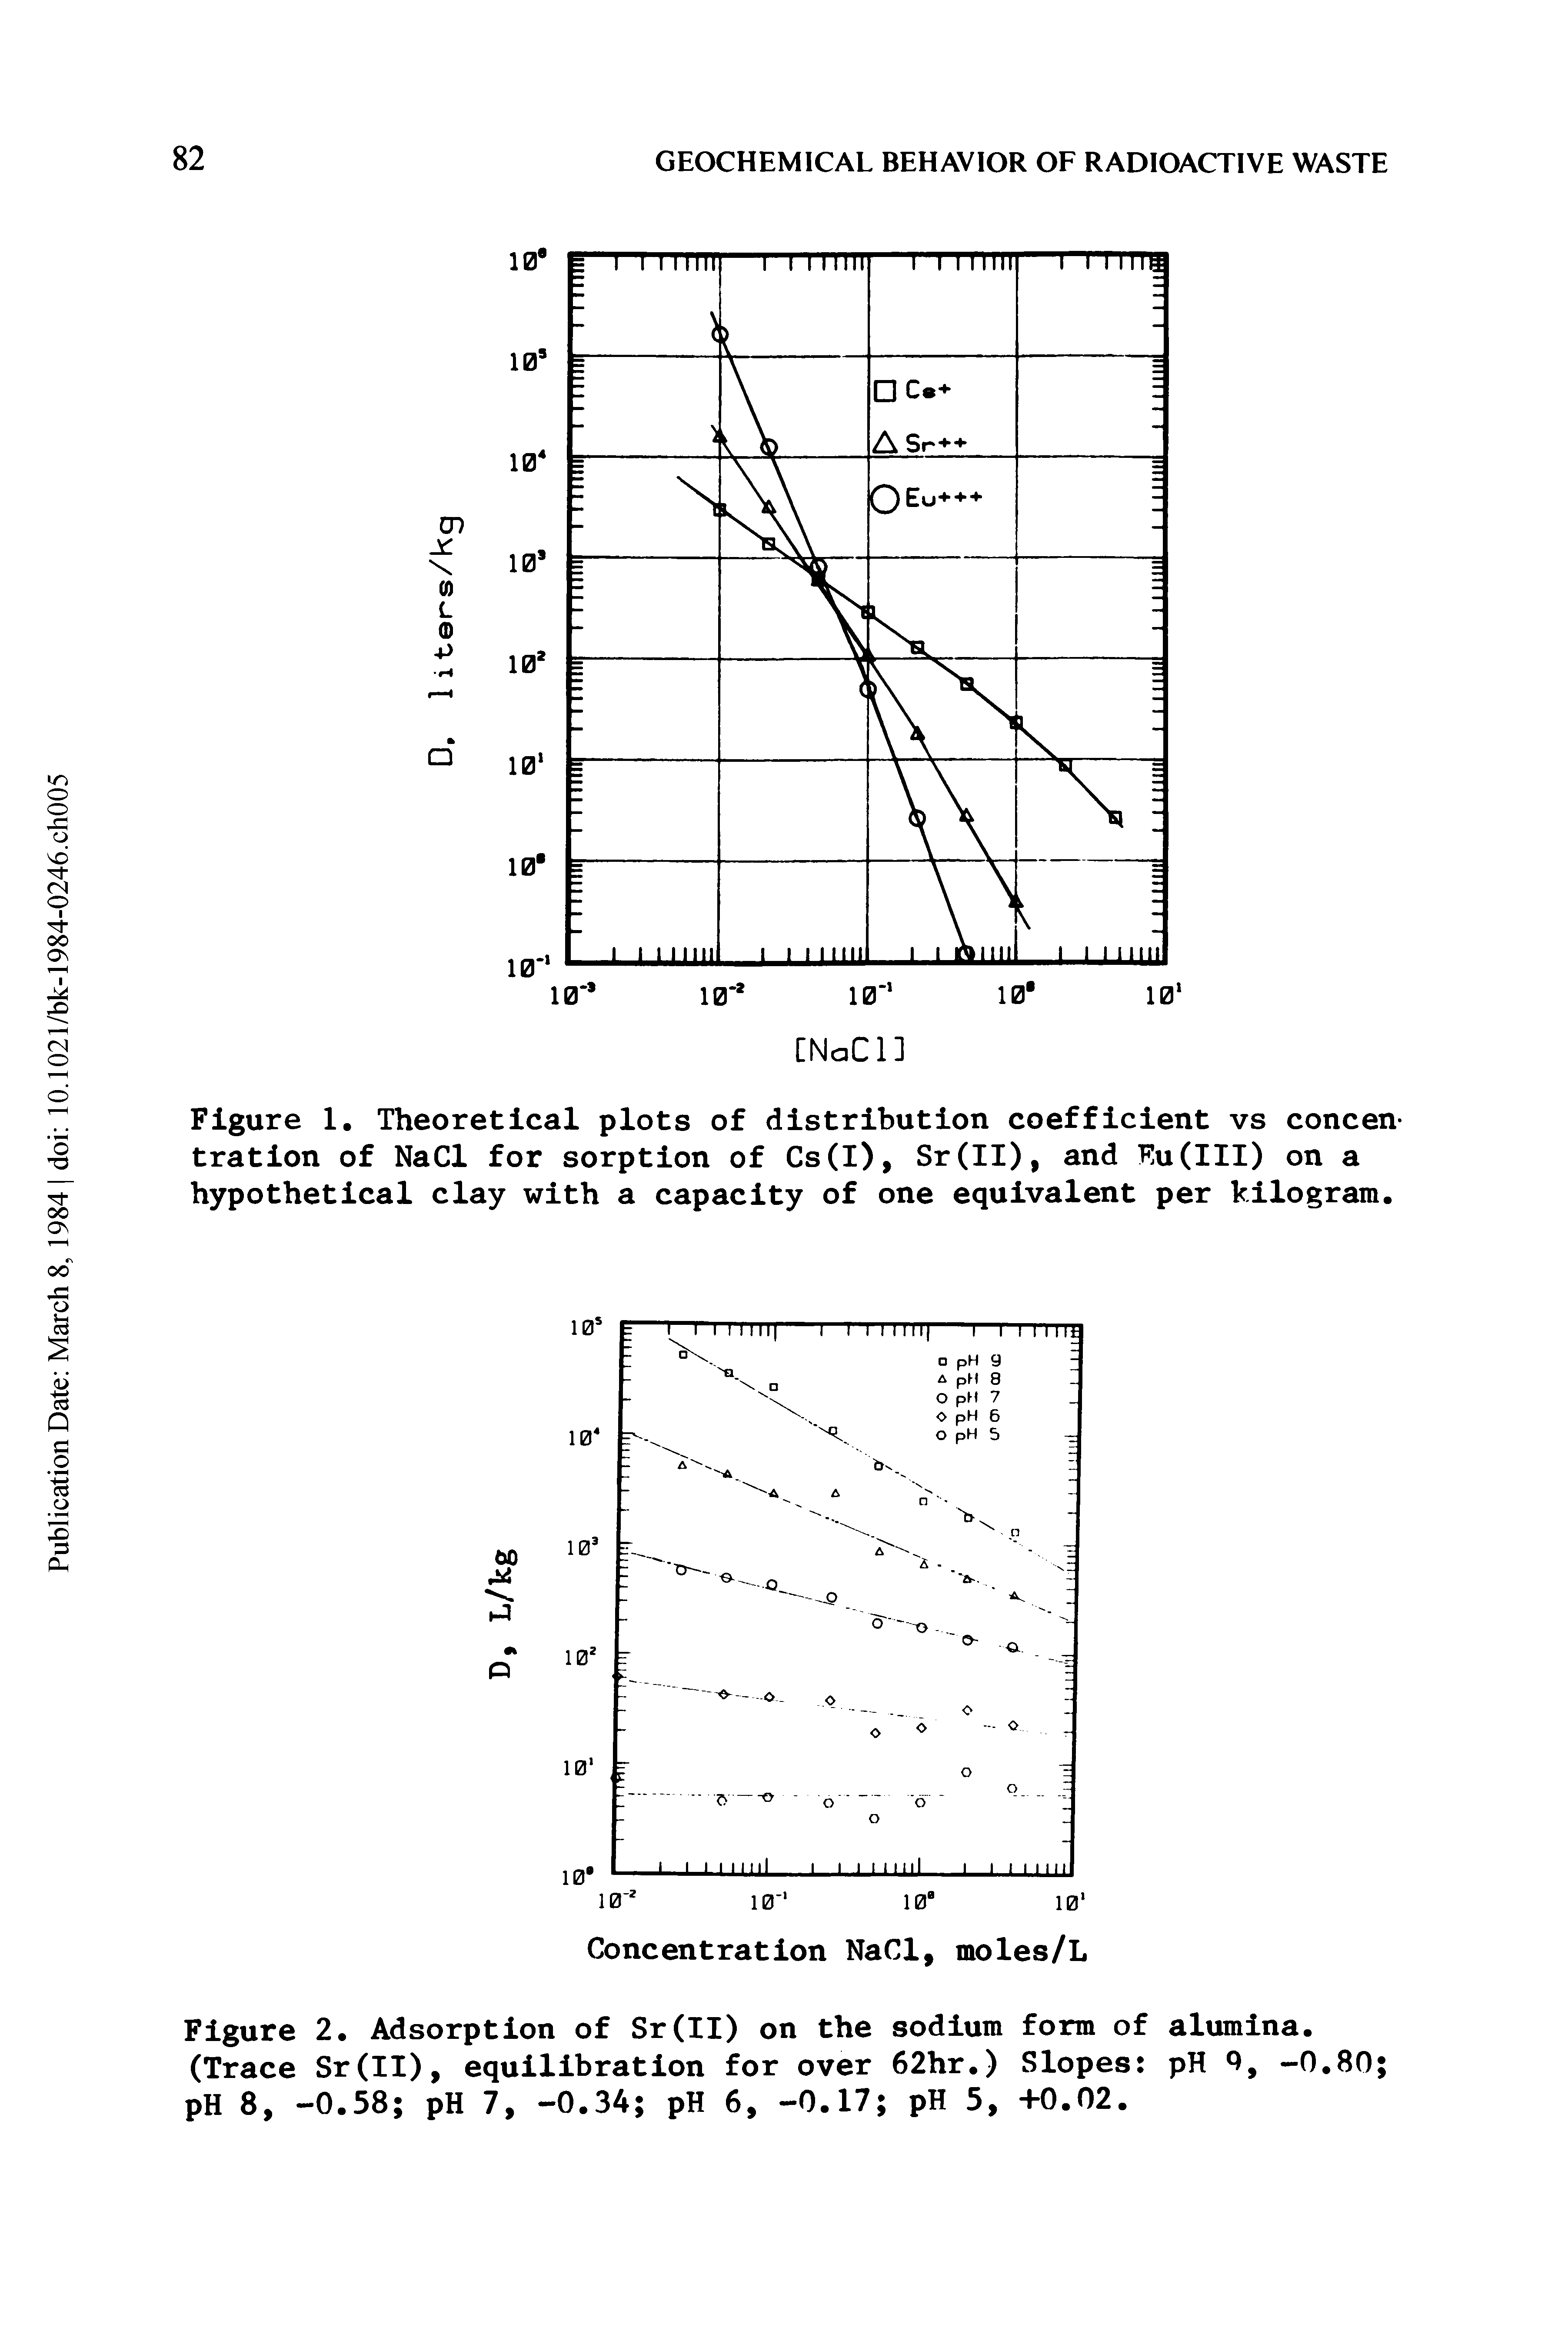 Figure 1. Theoretical plots of distribution coefficient vs concentration of NaCl for sorption of Cs(I), Sr(II), and Hu (III) on a hypothetical clay with a capacity of one equivalent per kilogram.